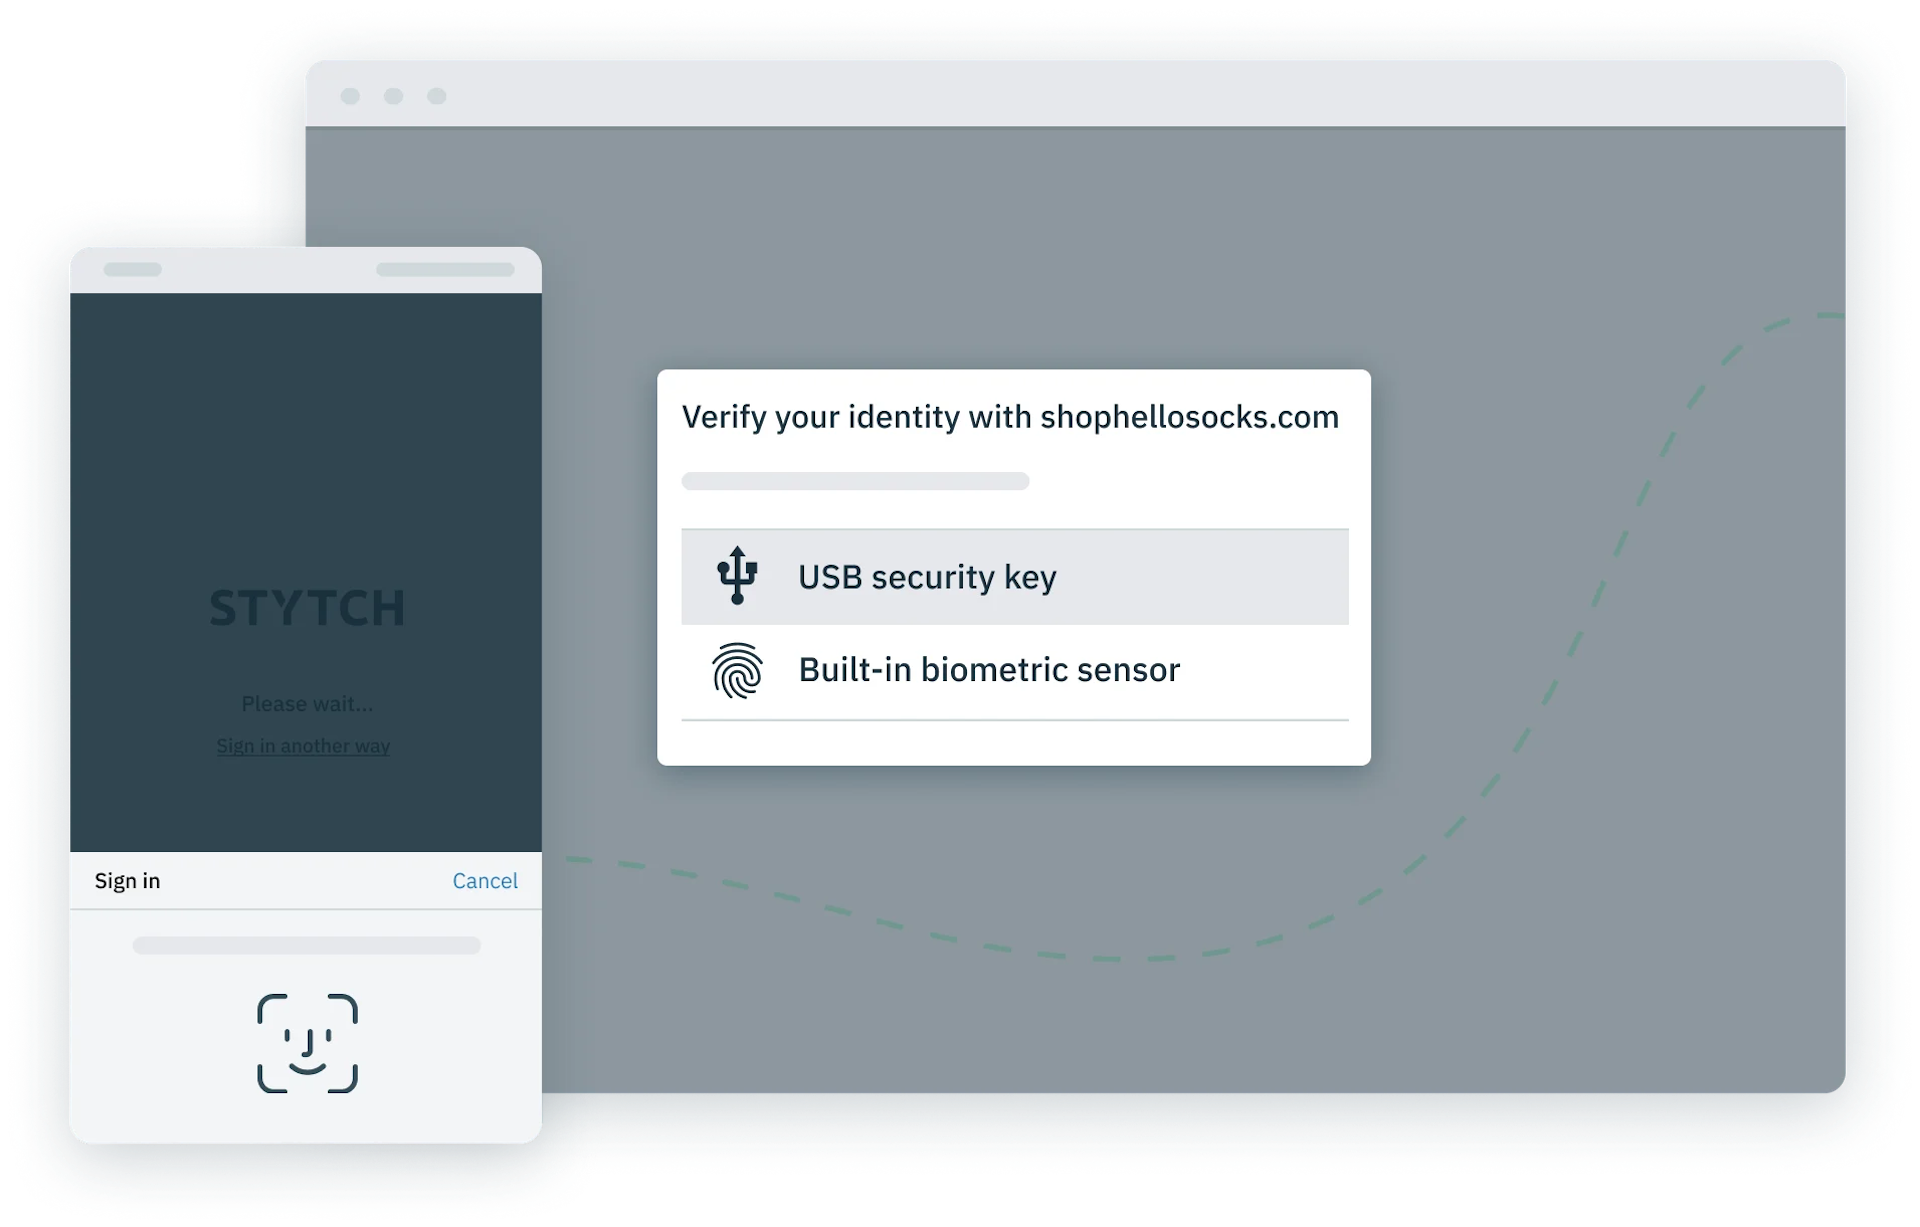 Improve conversion while boosting security